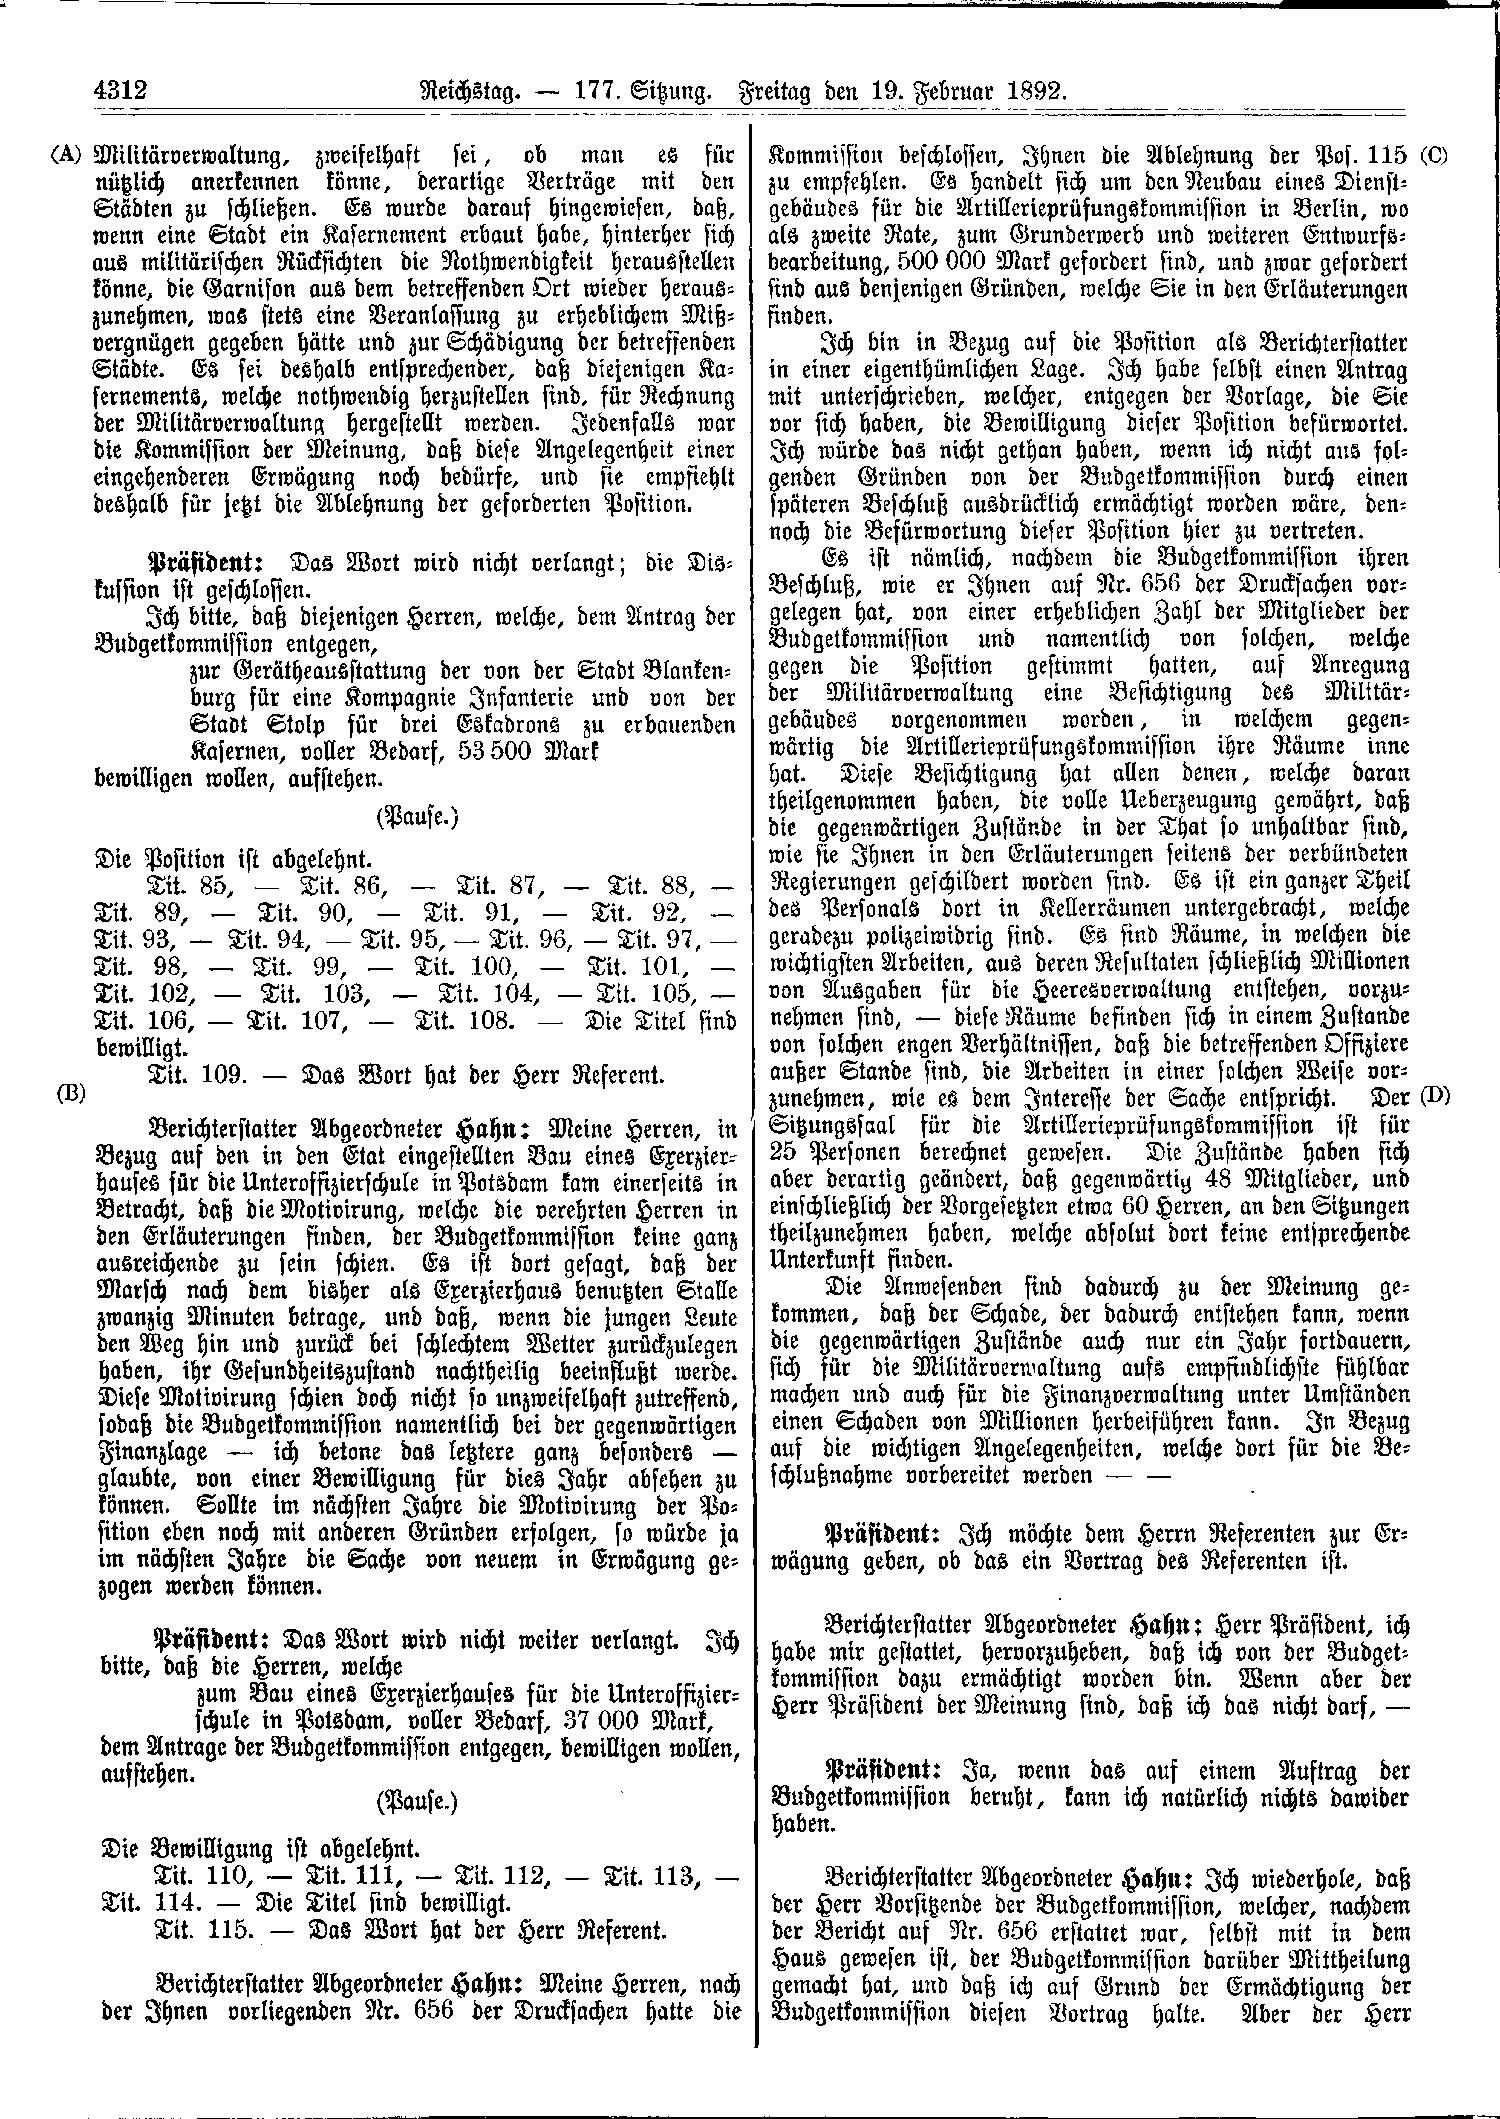 Scan of page 4312